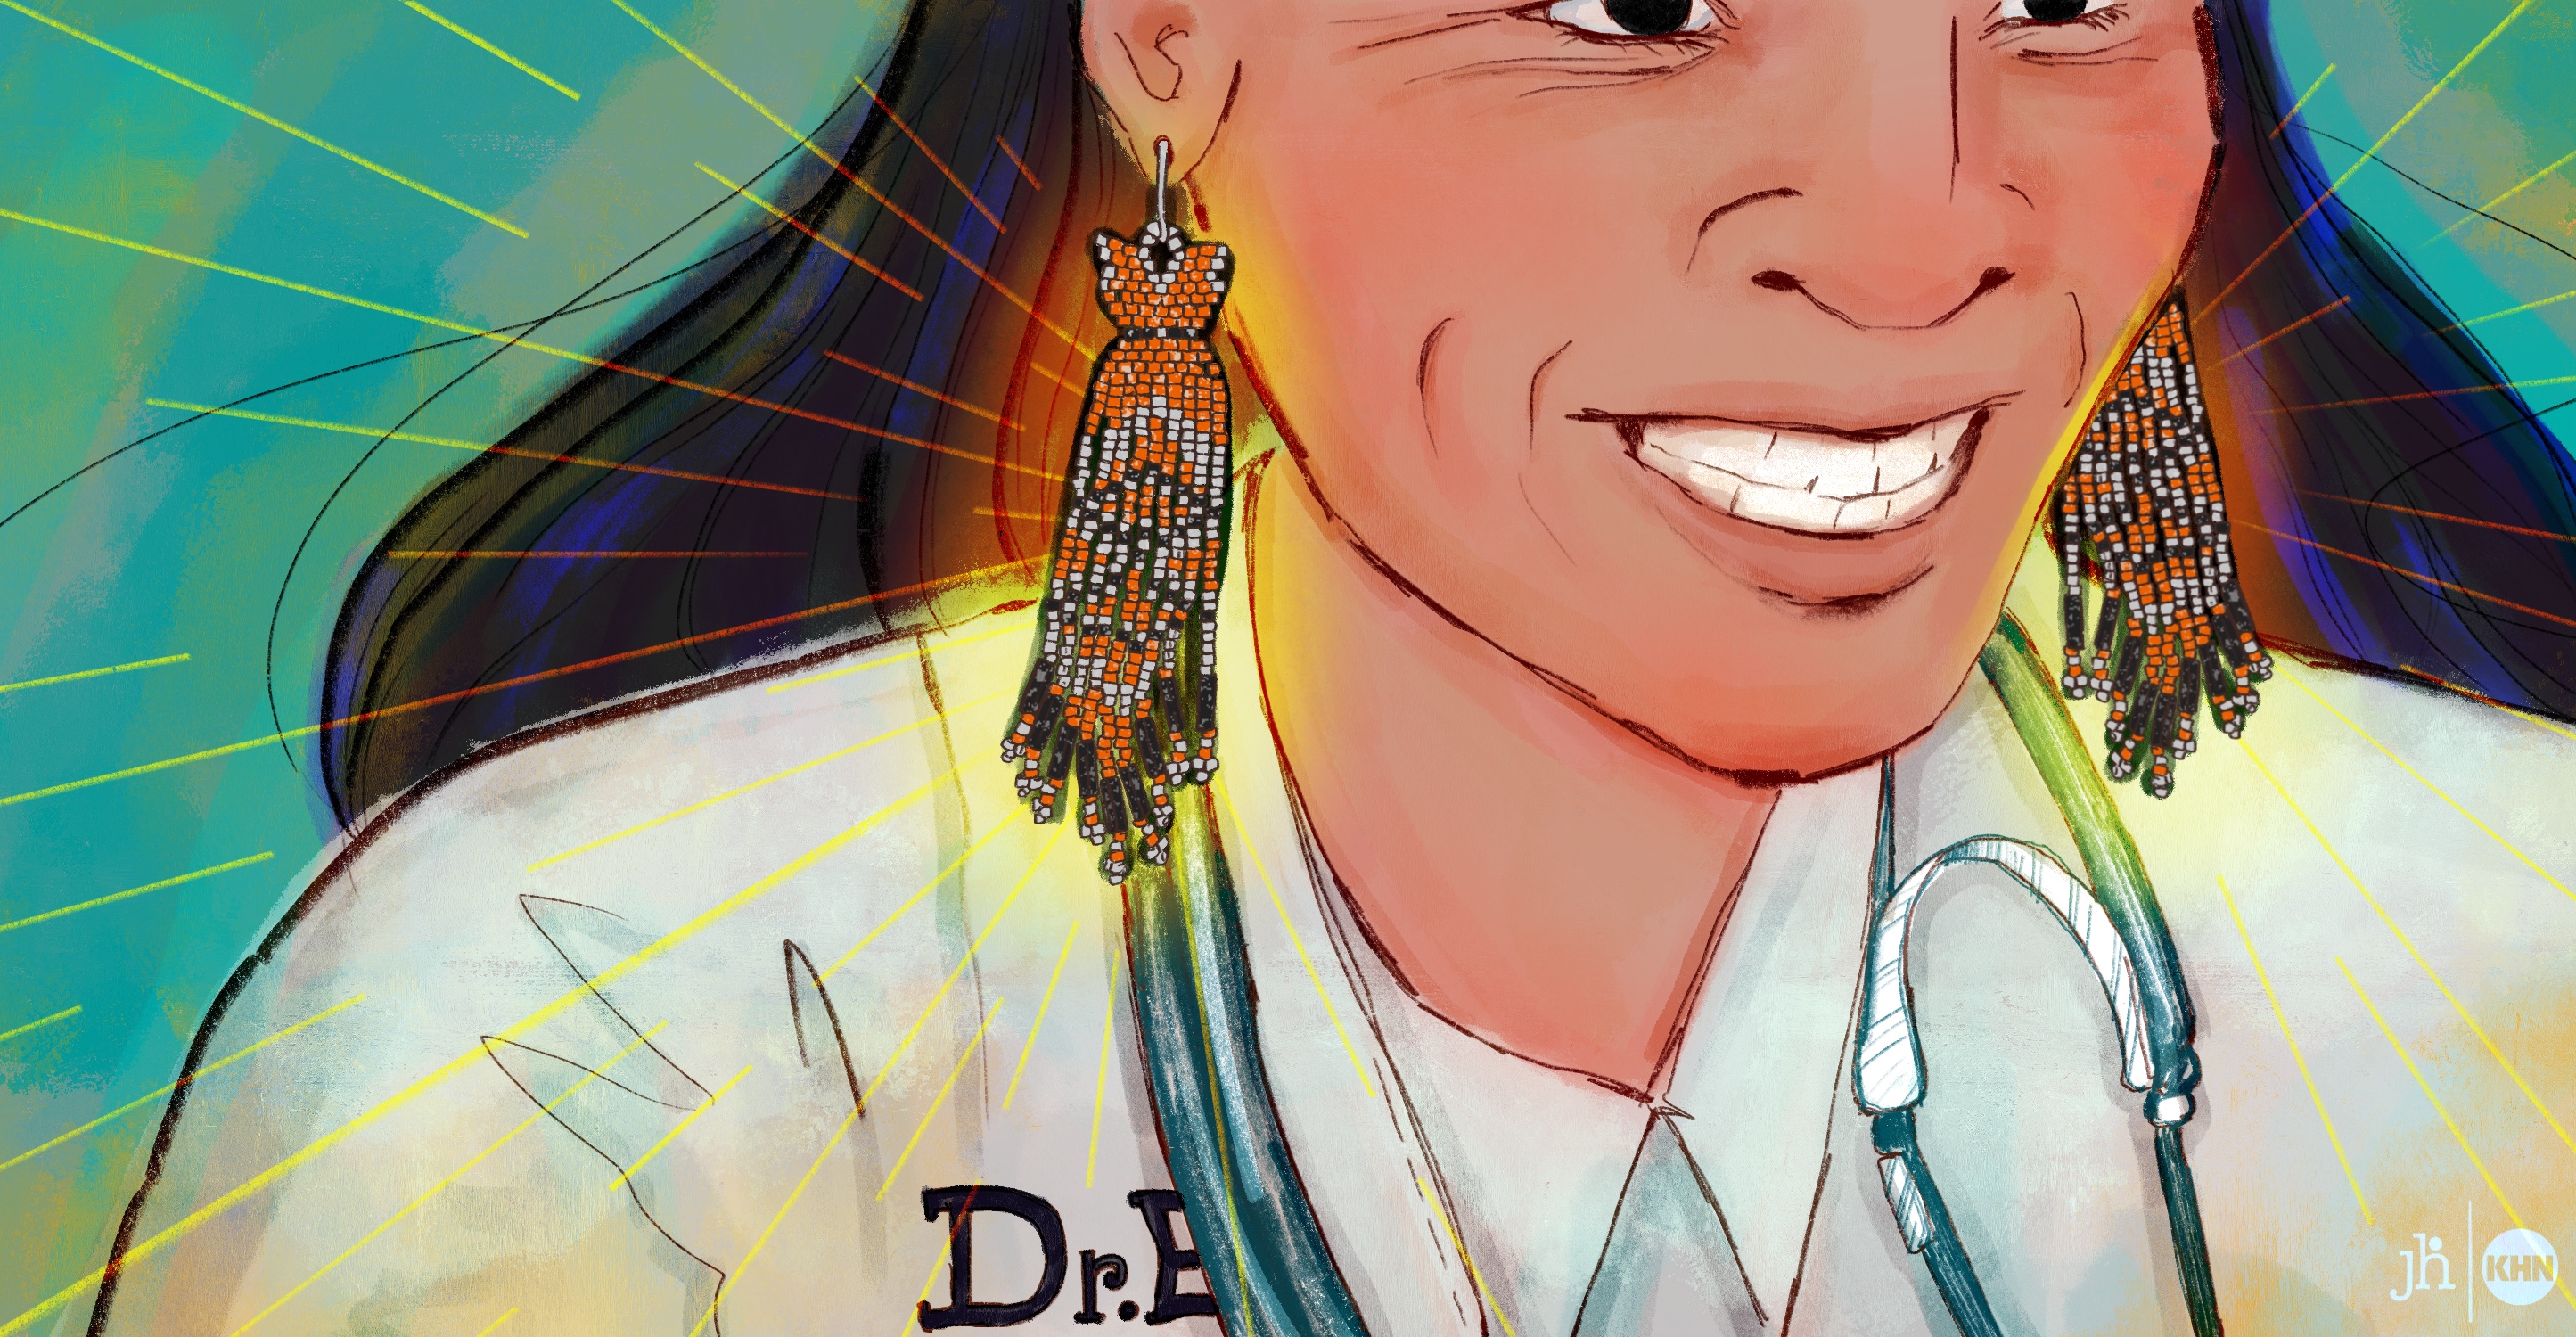 A digital illustration in pencil and watercolor. A smiling Indigenous woman wearing is wearing doctor's coat and has a stethoscope around her neck. She wears a pair of dangly beaded earrings which are orange, black, and white. The earrings appear to be radiating light, to emphasize their importance in the image.